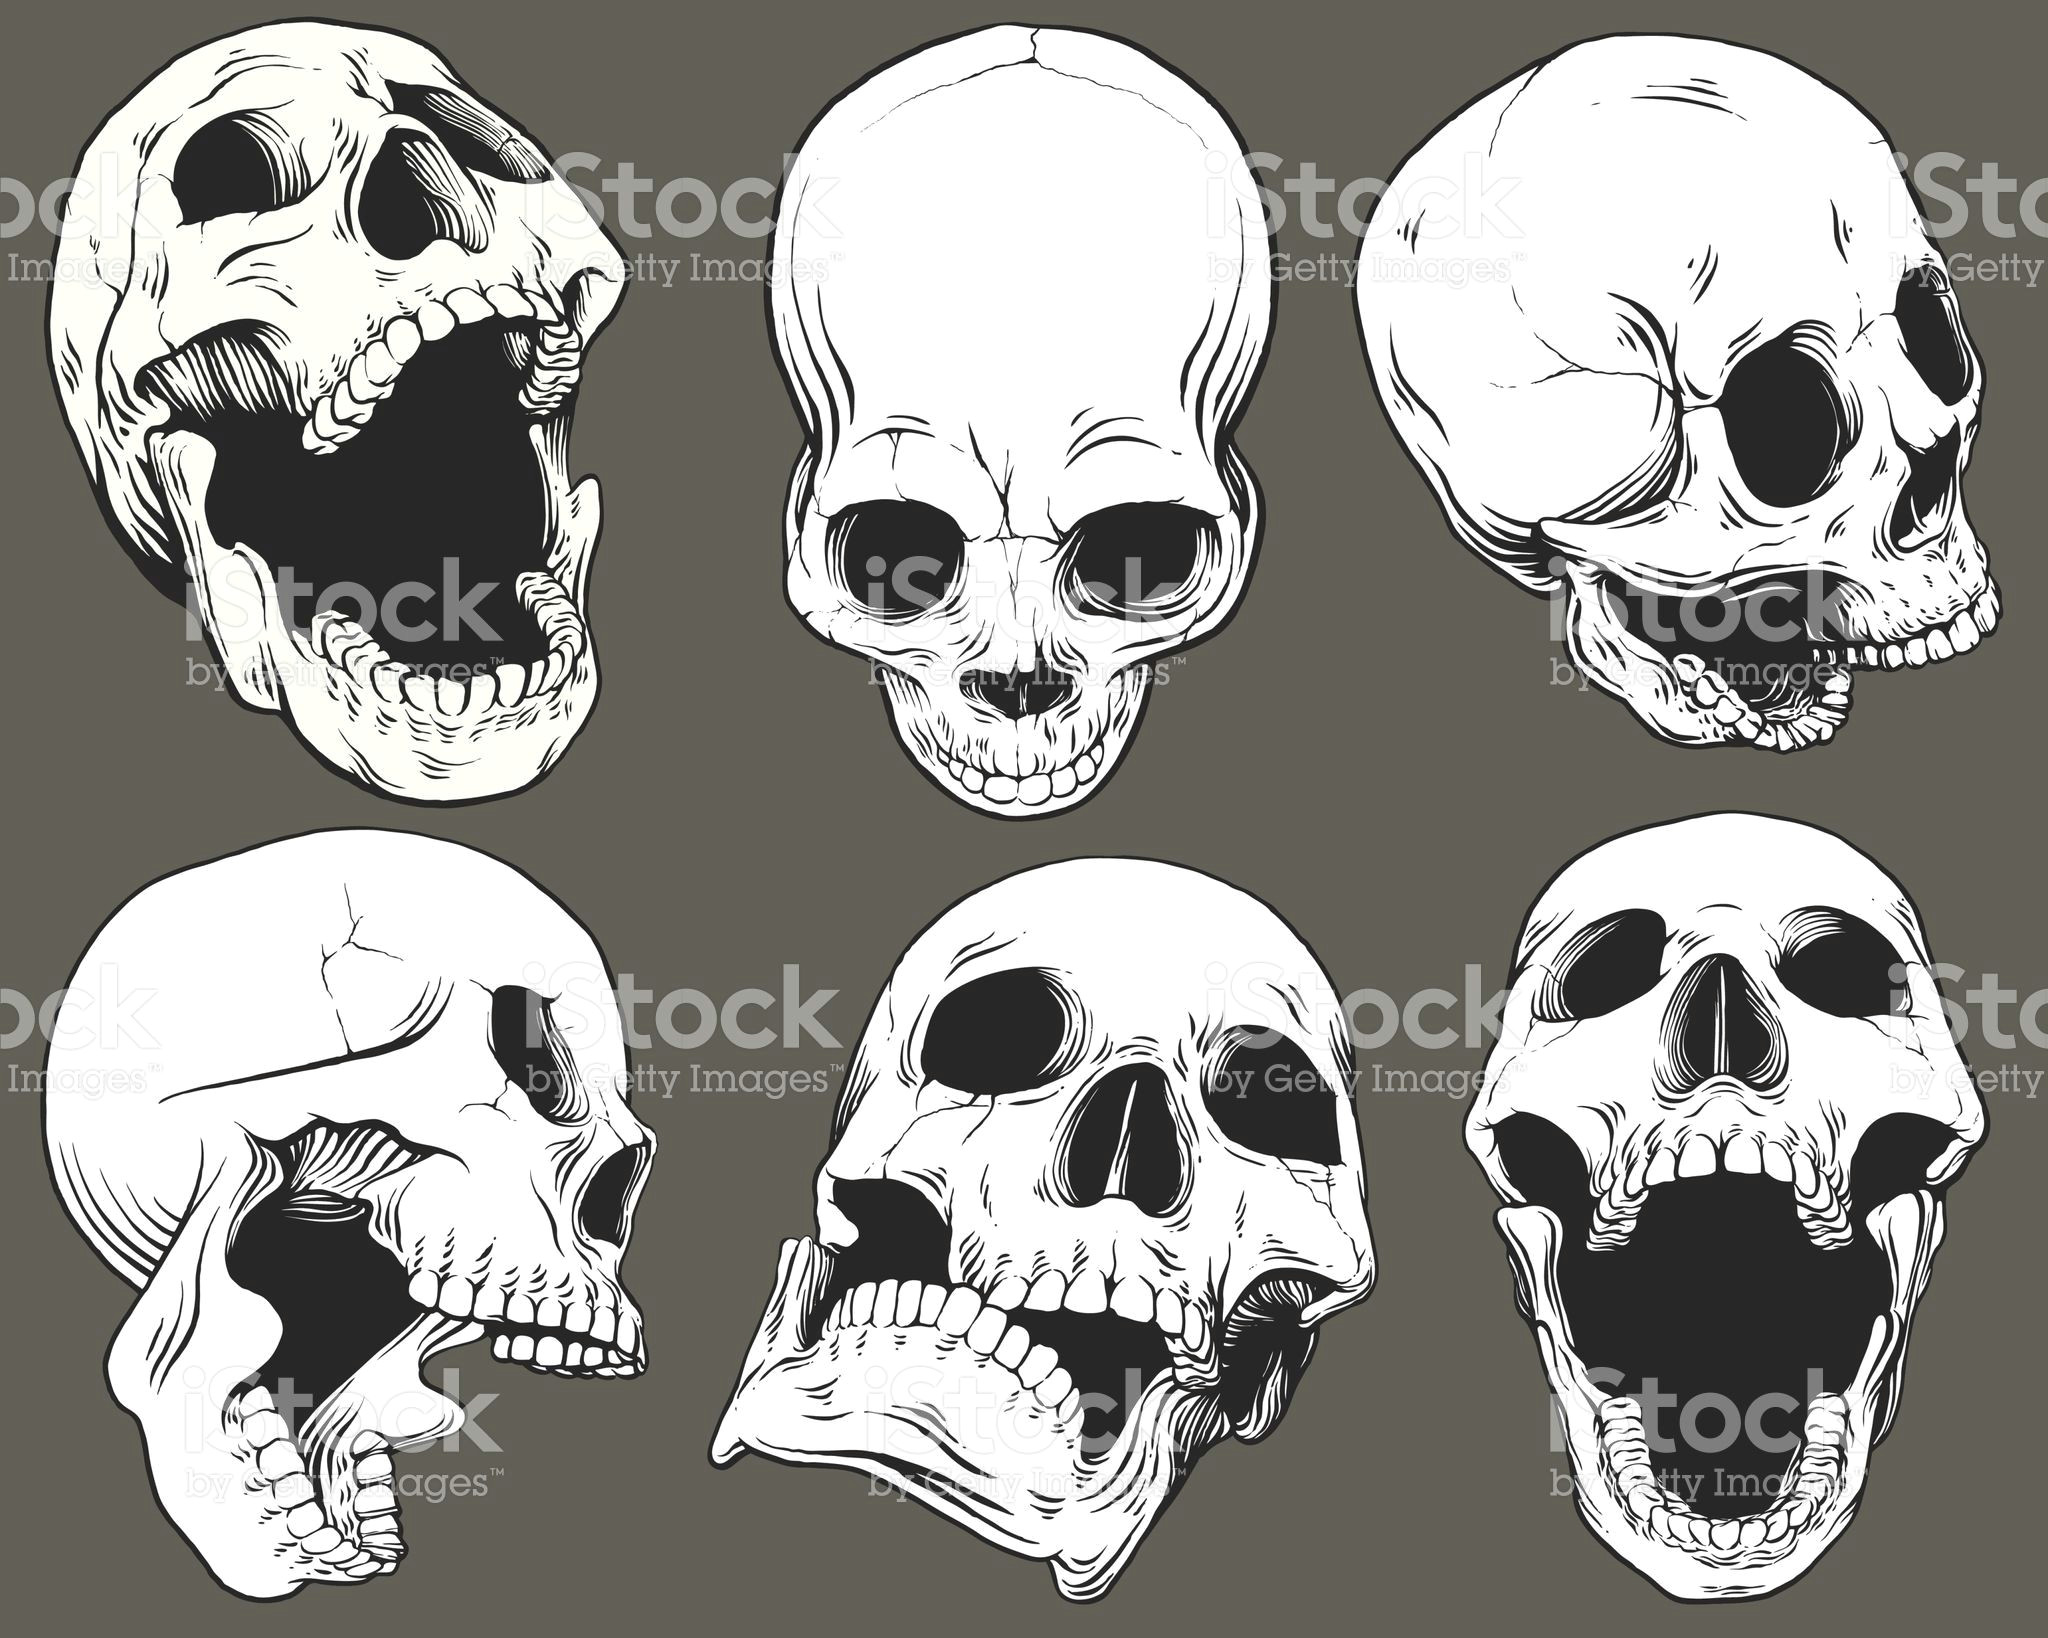 Skull Drawing Ref Collection Of Six Vector isolated Black and White Skulls Shown From